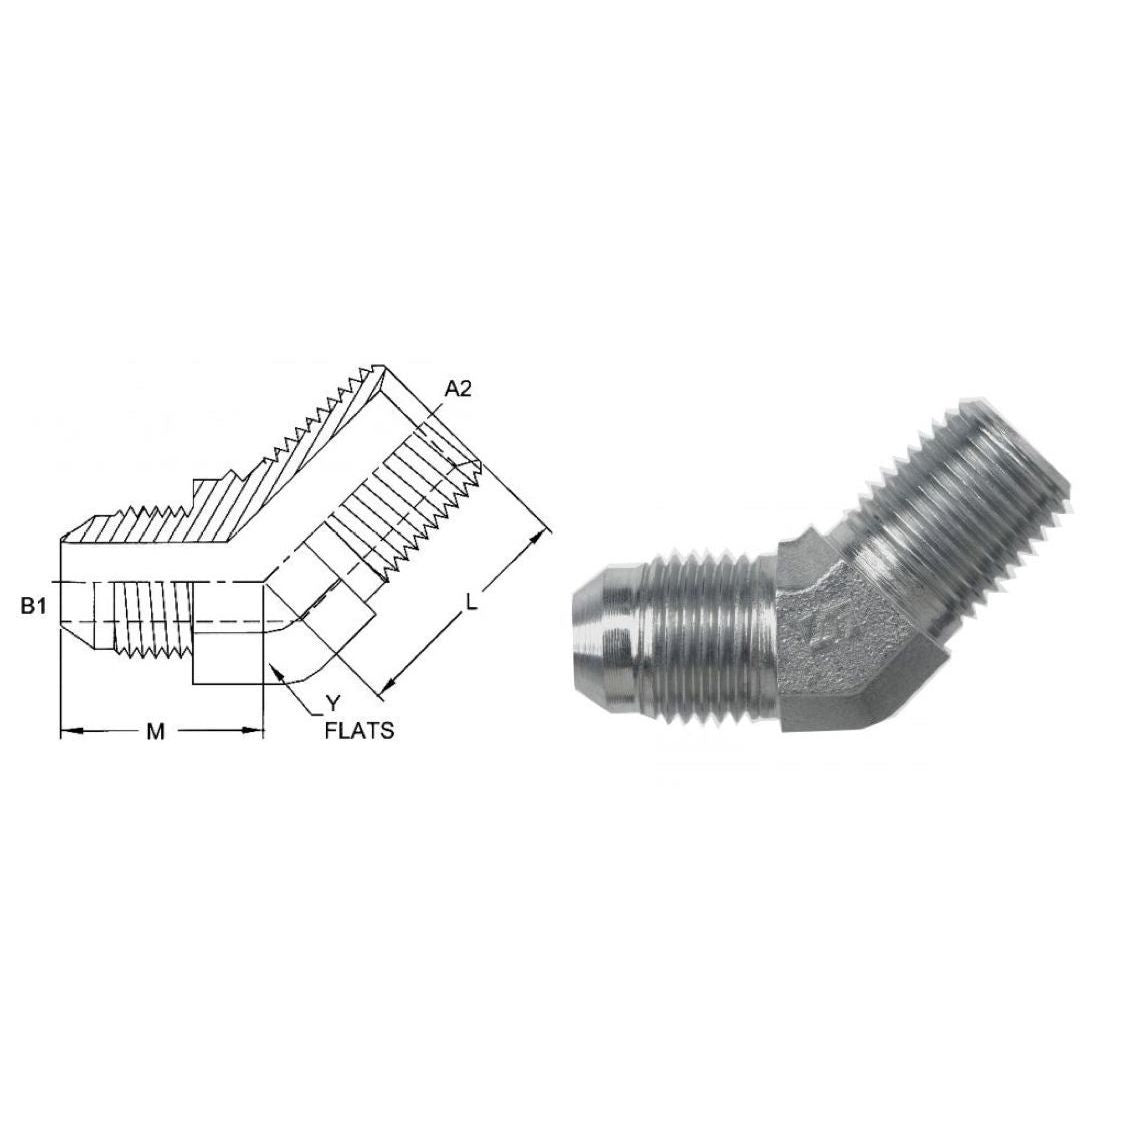 2503-24-24-SS : OneHydraulics 45-Degree Elbow, 1.5 (1-1/2) Male JIC x 1.5 (1-1/2) Male NPT, Stainless Steel, 3600psi